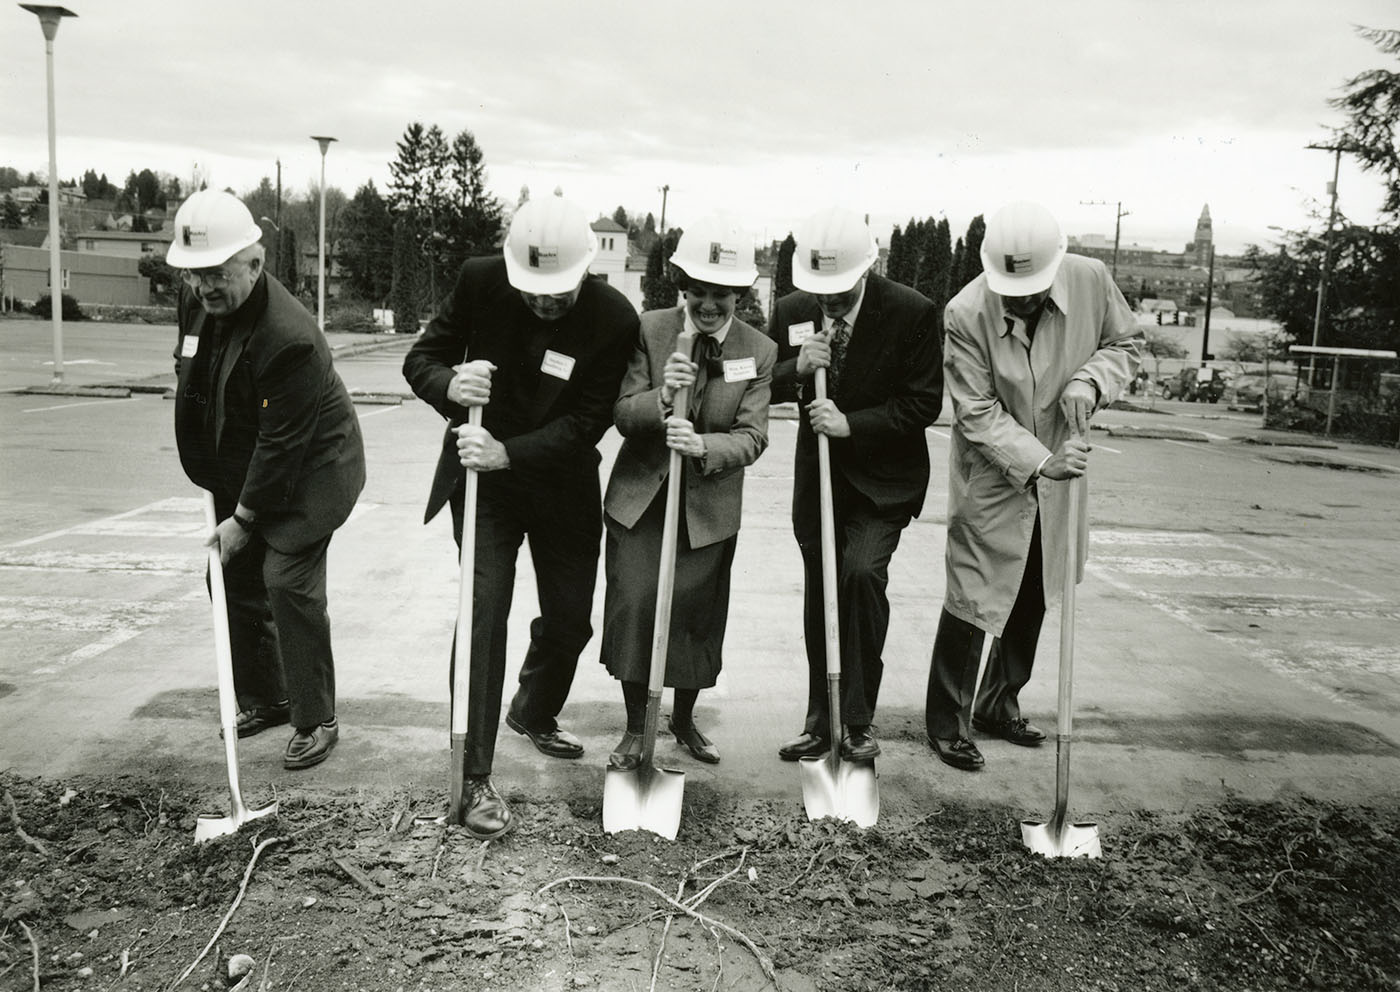 Breaking ground (with shovels) ceremony at the site that would become Sullivan Hall (1998)